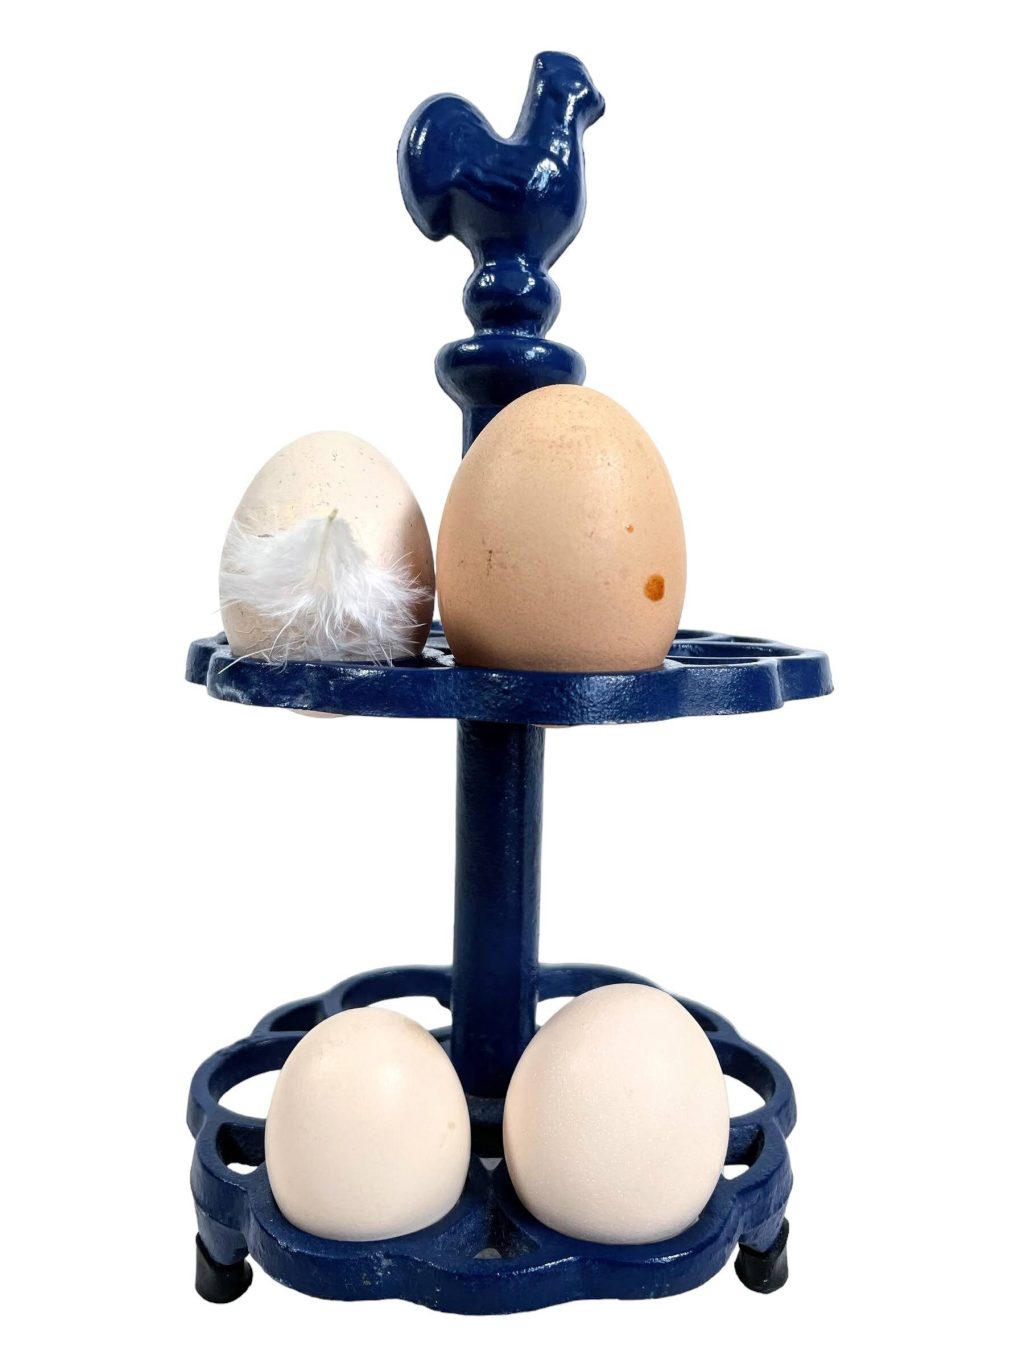 Vintage French Blue Cast Iron Metal Egg Rack Holder Stand Display circa 1990-2000’s